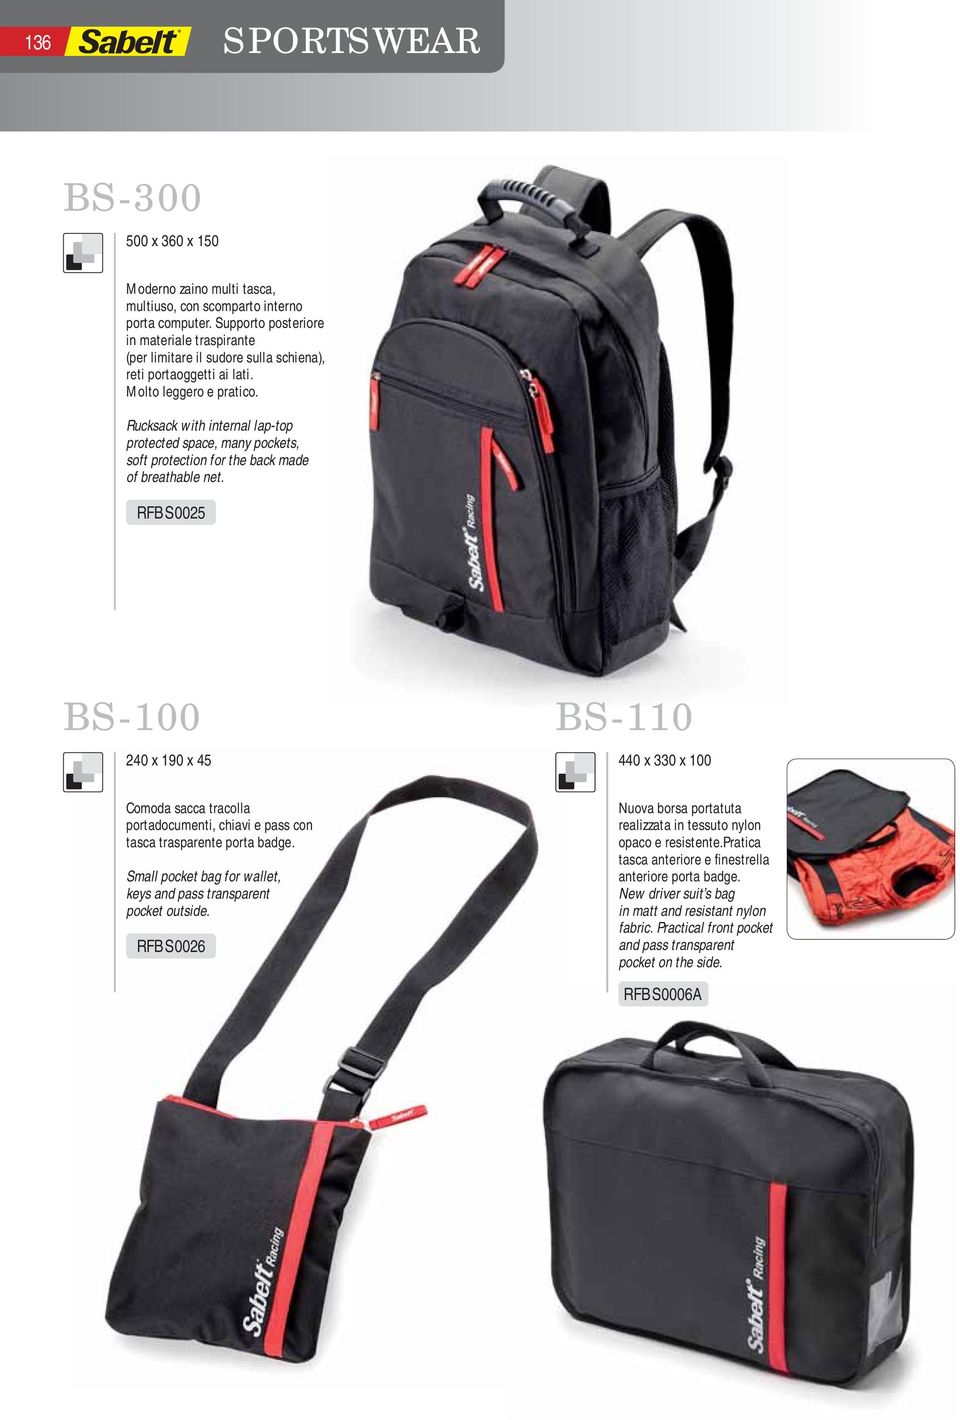 Rucksack with internal lap-top protected space, many pockets, soft protection for the back made of breathable net.